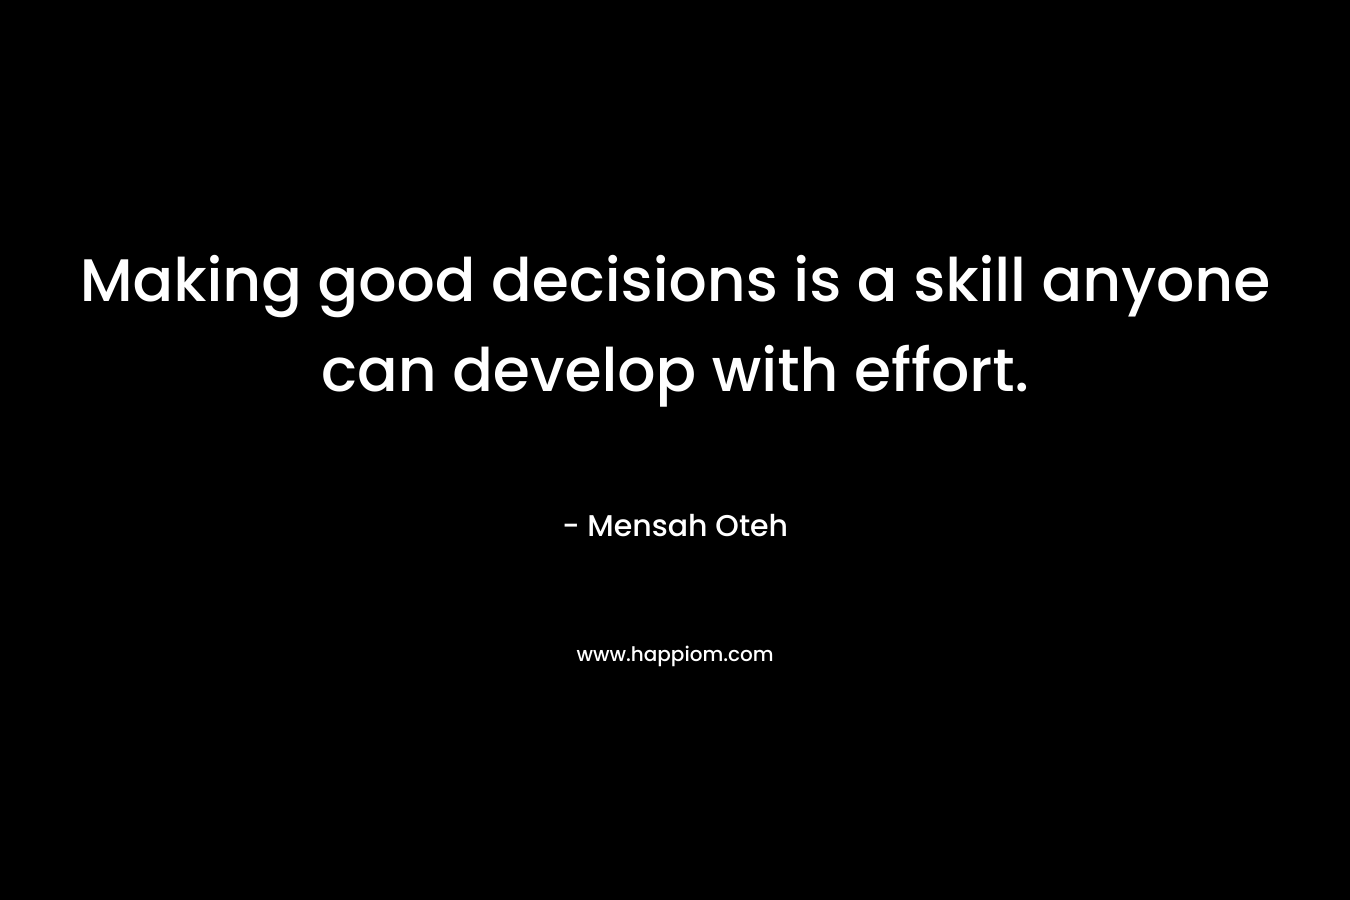 Making good decisions is a skill anyone can develop with effort.